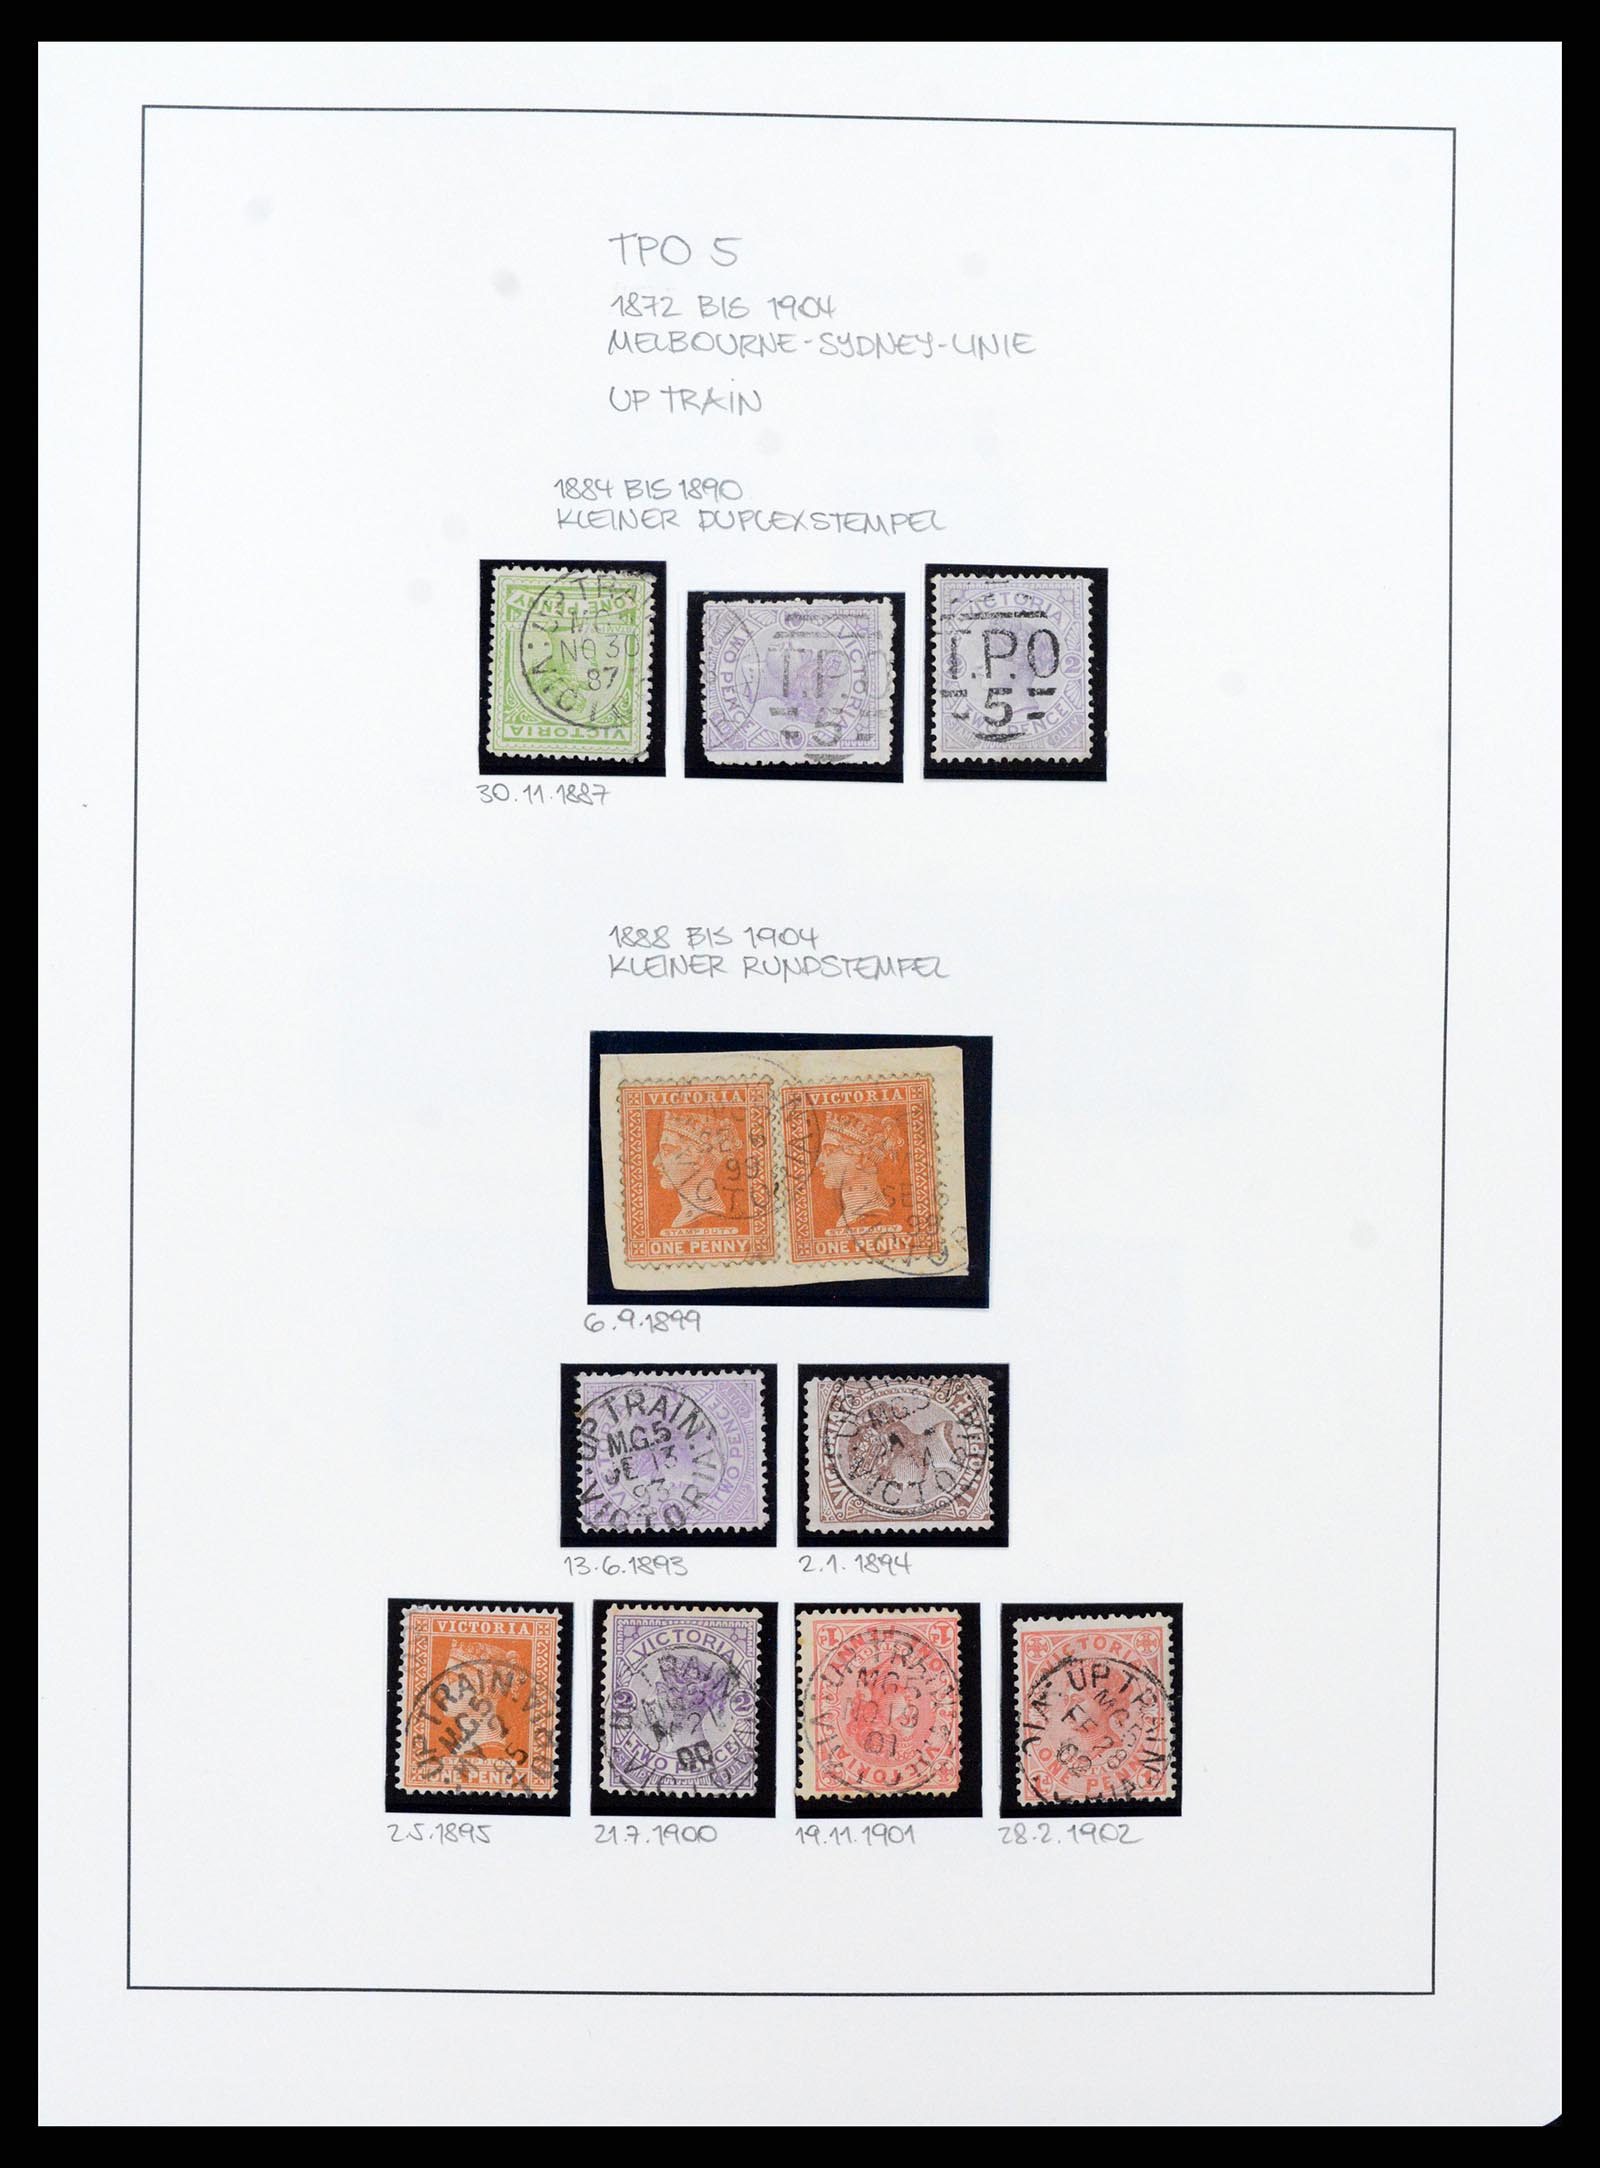 37514 010 - Stamp collection 37514 Victoria tpo cancellations 1865-1930.